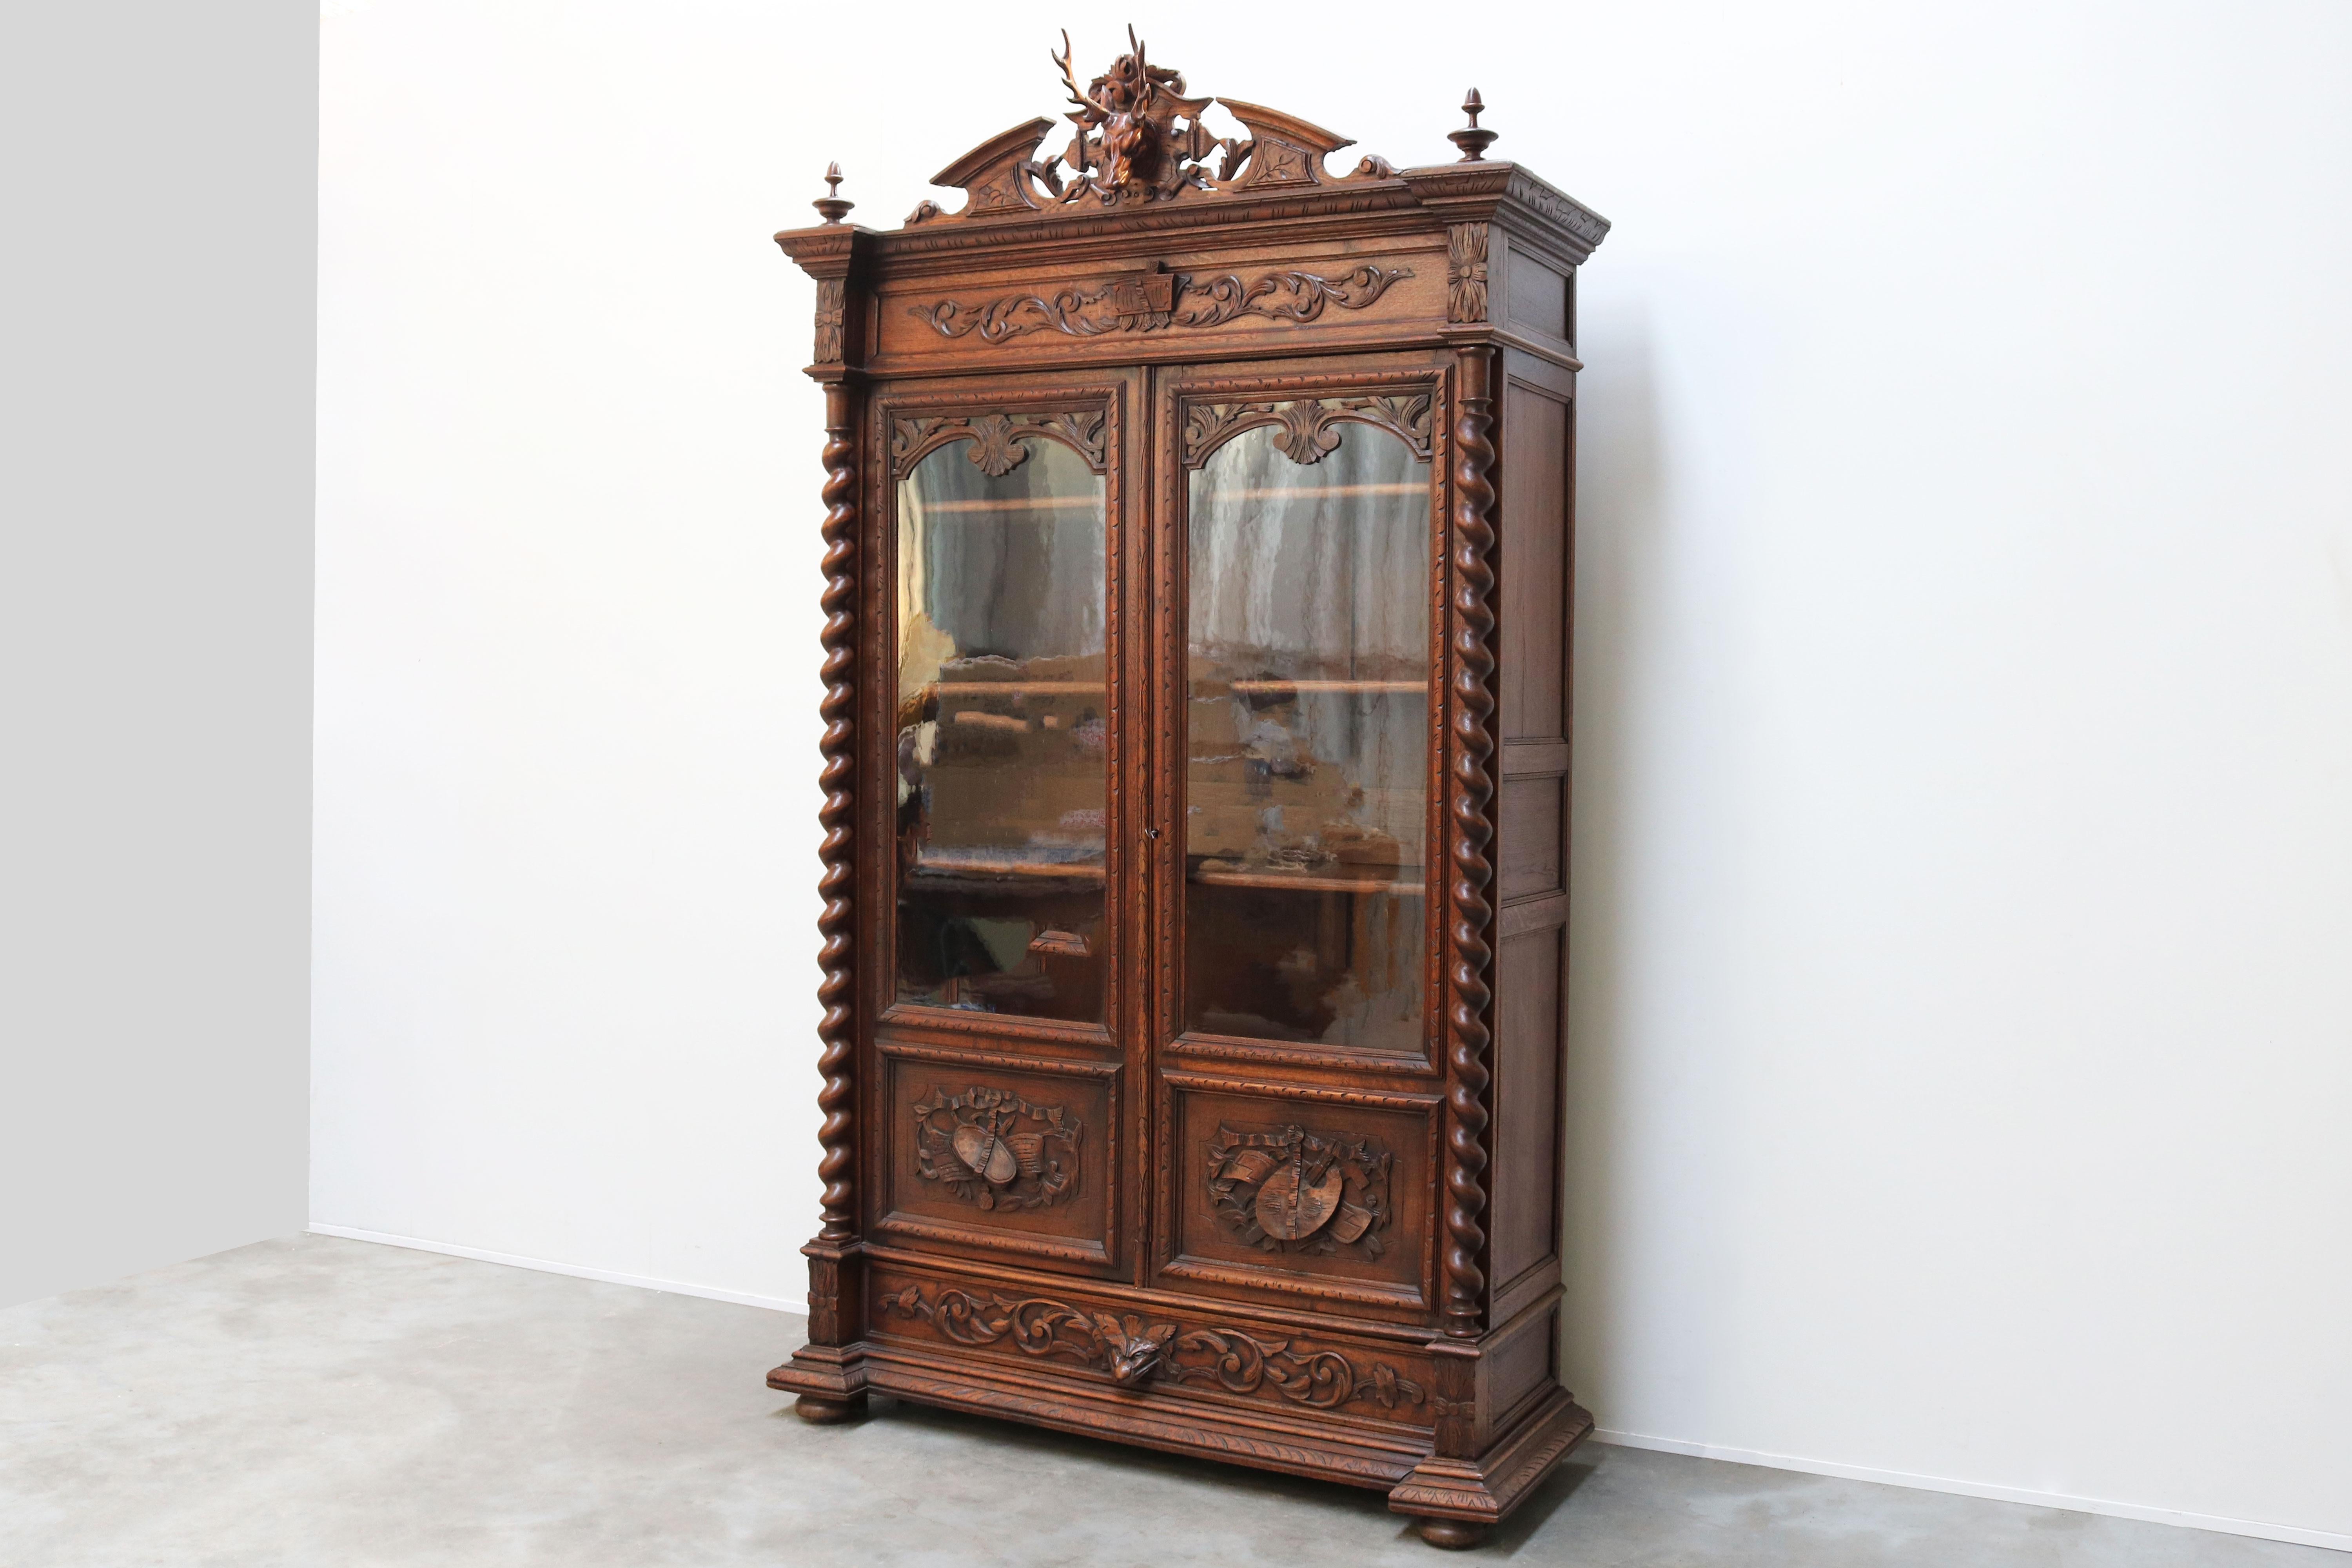 Gorgeous 19th century French antique Hunt style Bookcase / display cabinet with open carved Barley twist posts and various renaissance revival elements. And to finish it on top a most impressive carved Stag! 
Fully made from European oak and hand